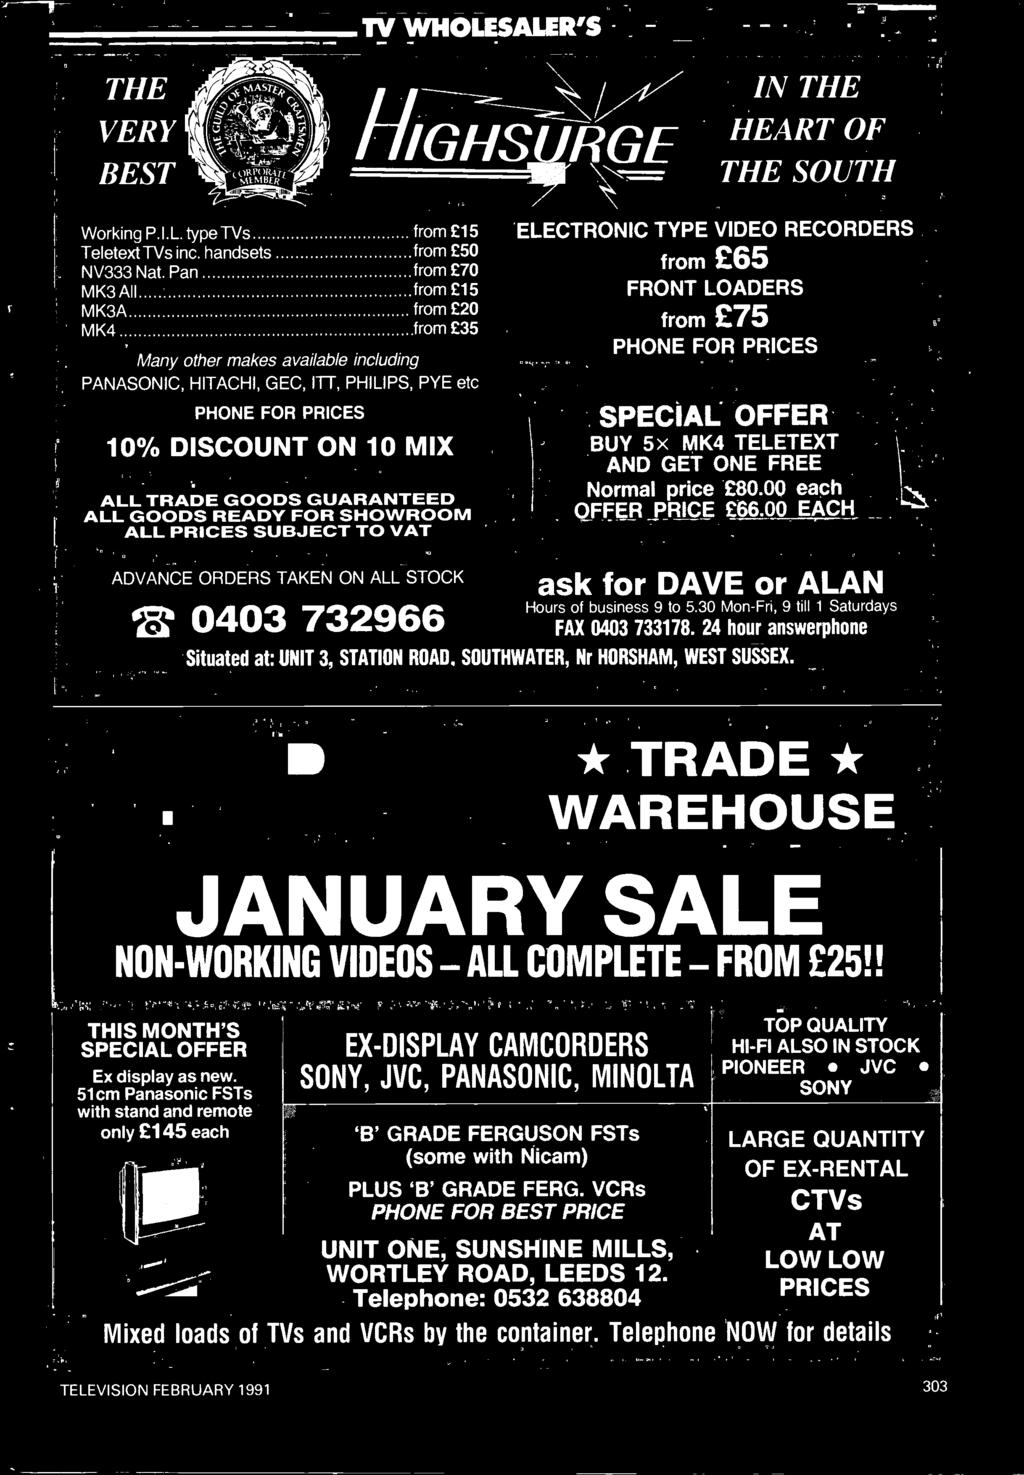 HORSHAM, WEST SUSSEX W TREE TRADE * WAREHOUSE JANUARY SALE NON -WORKING VIDEOS ALL COMPLETE FROM 25!